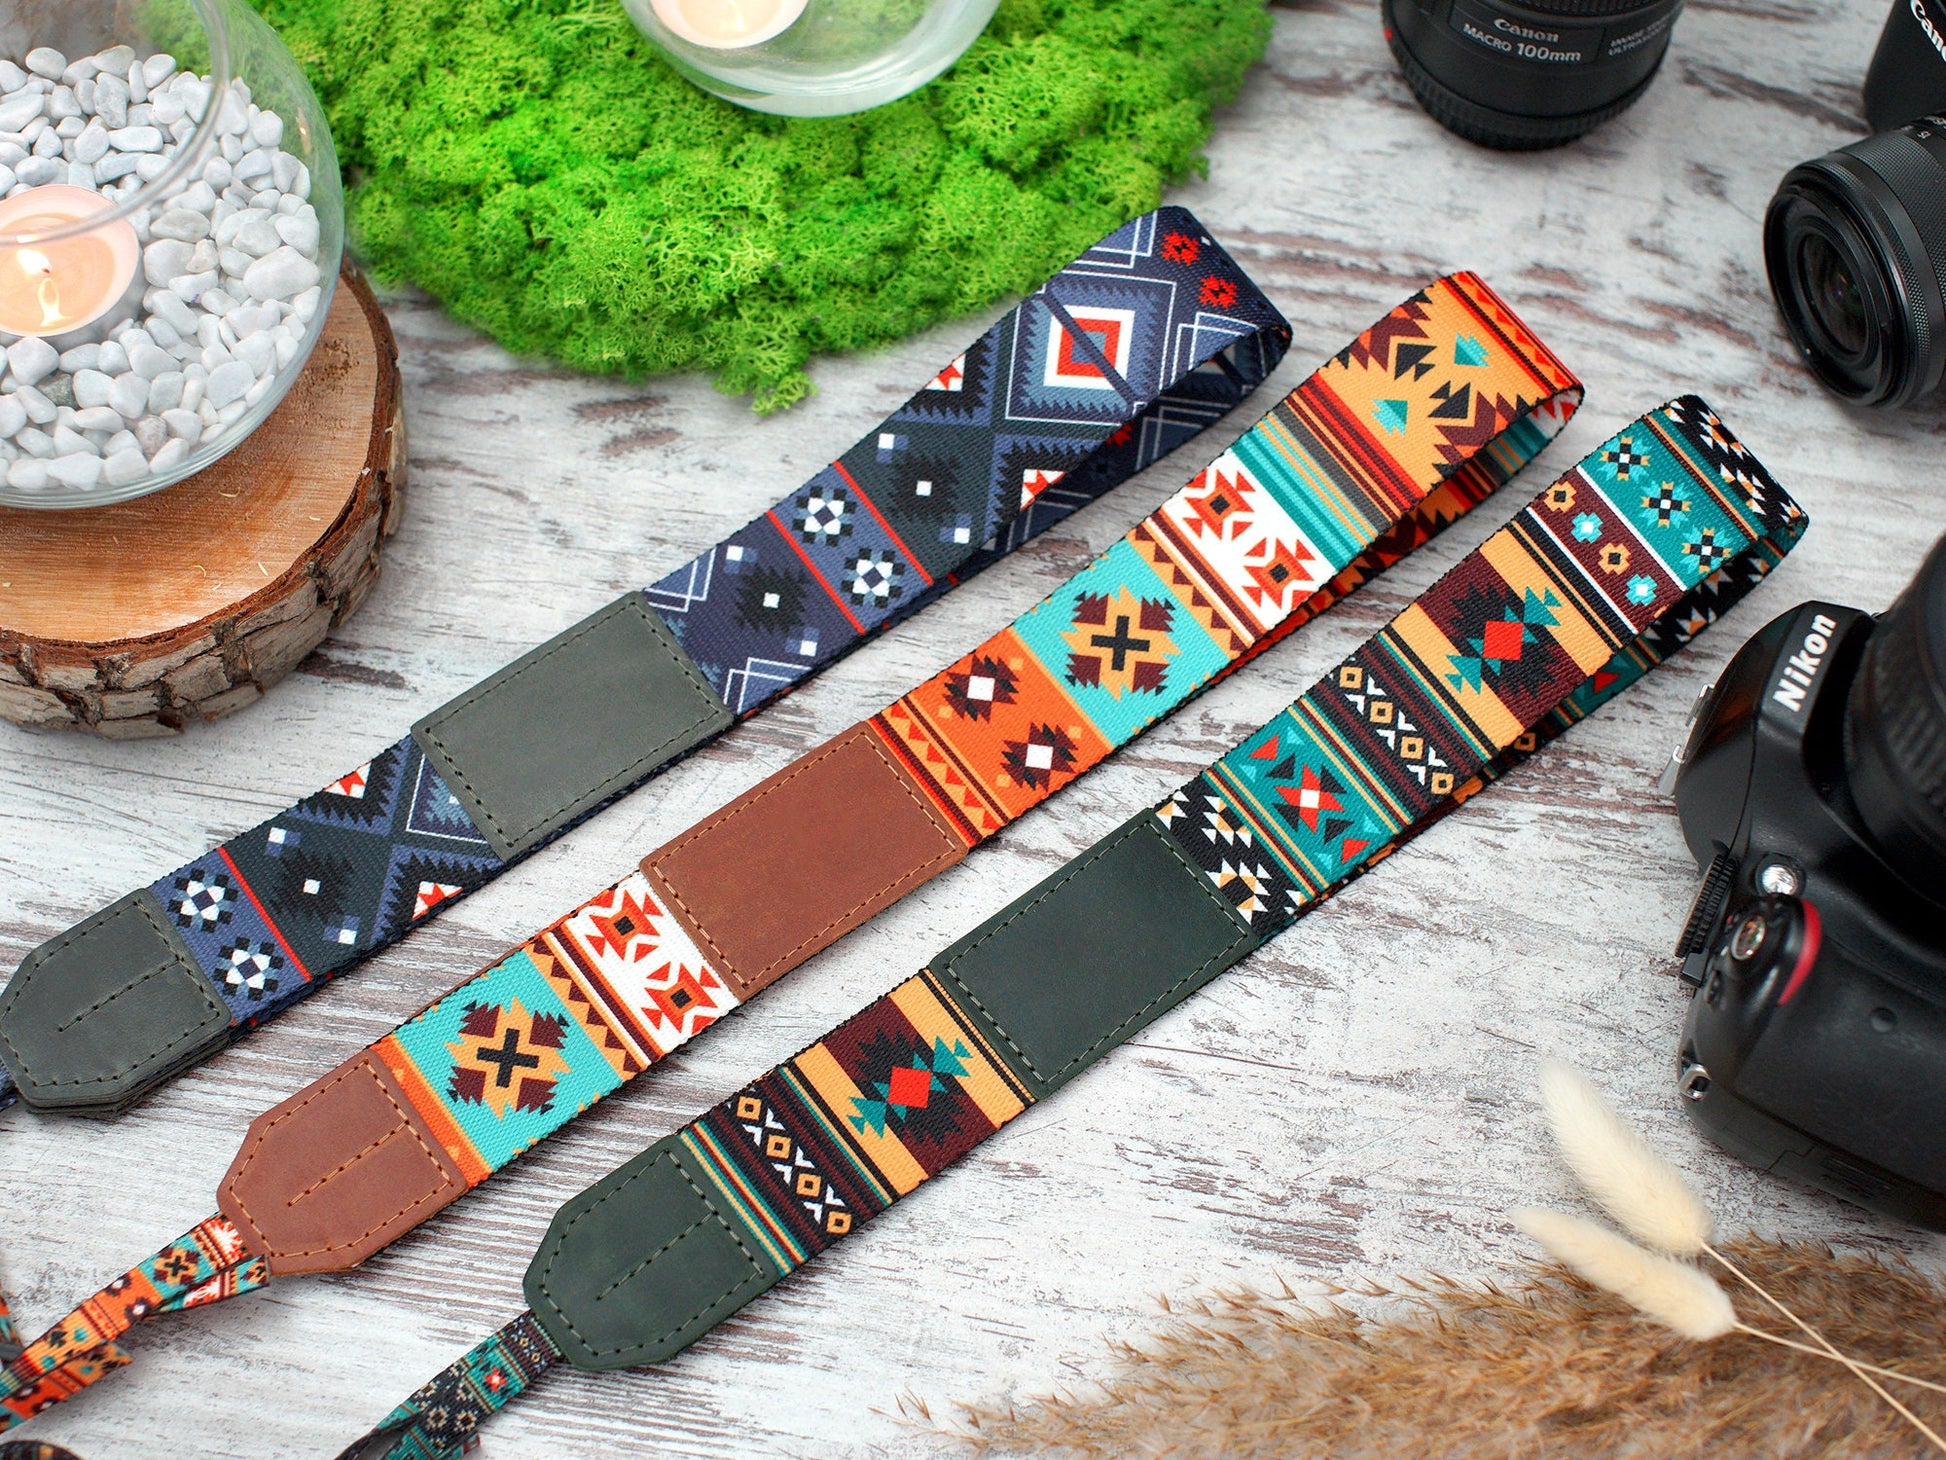  Personalized Leather Camera Straps for Photographers